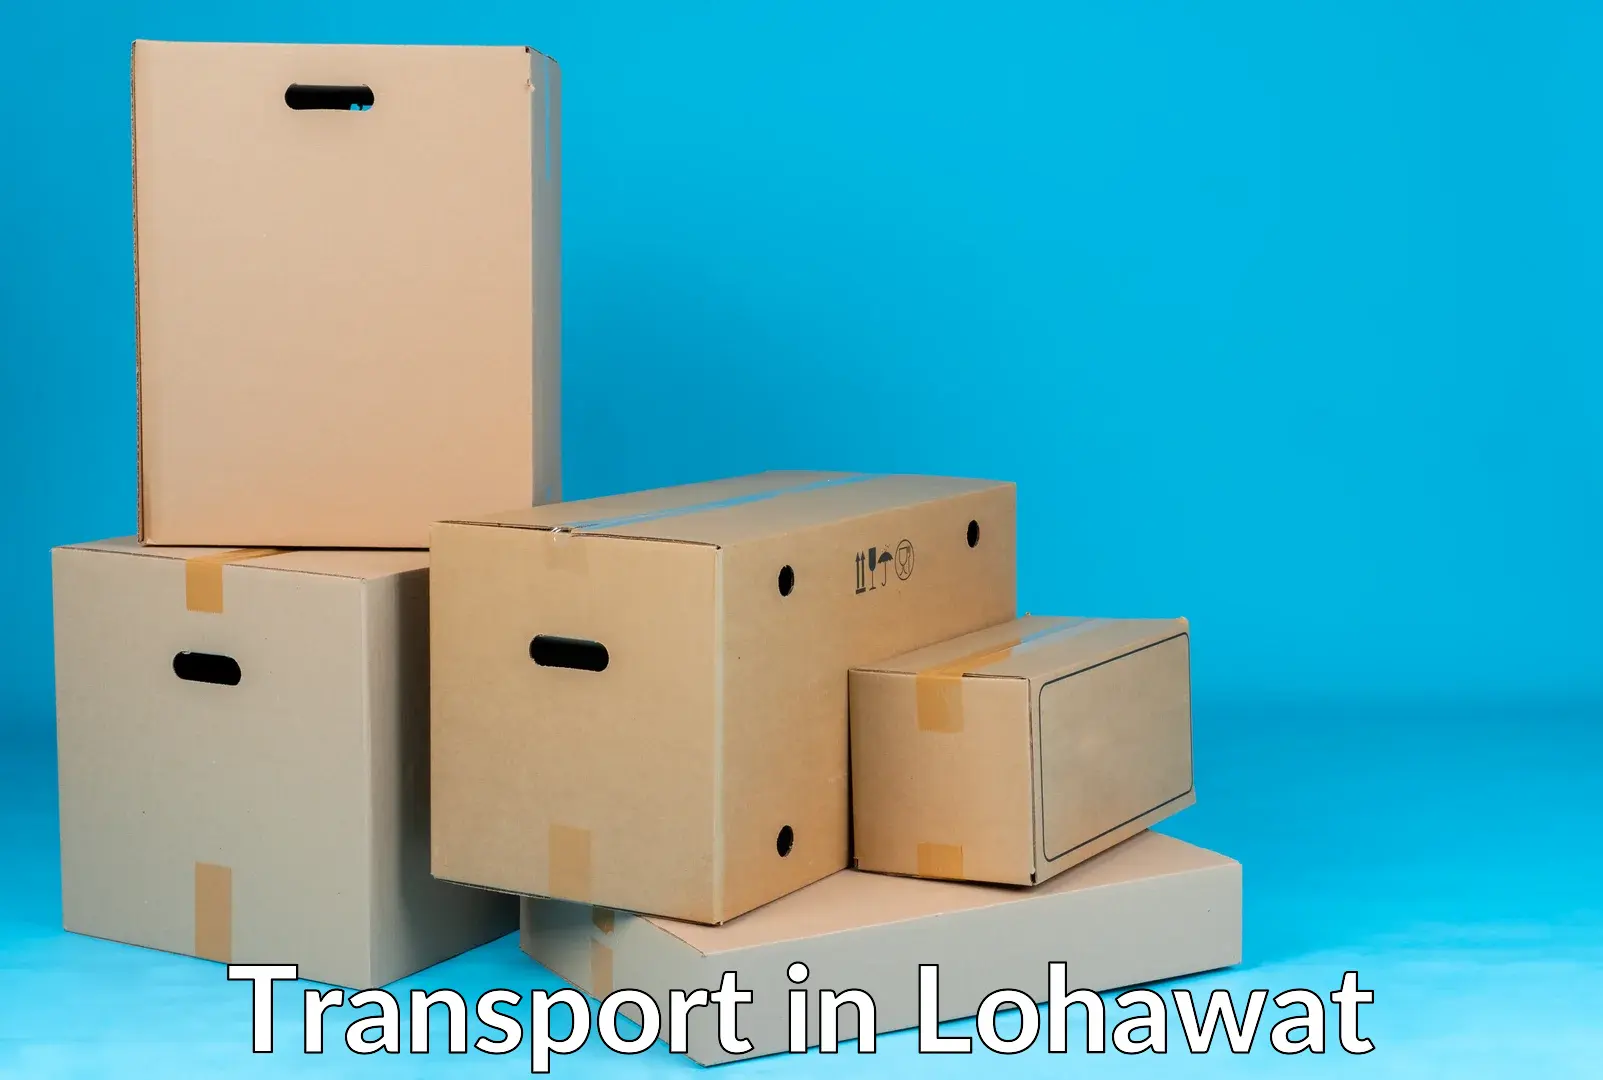 Air cargo transport services in Lohawat